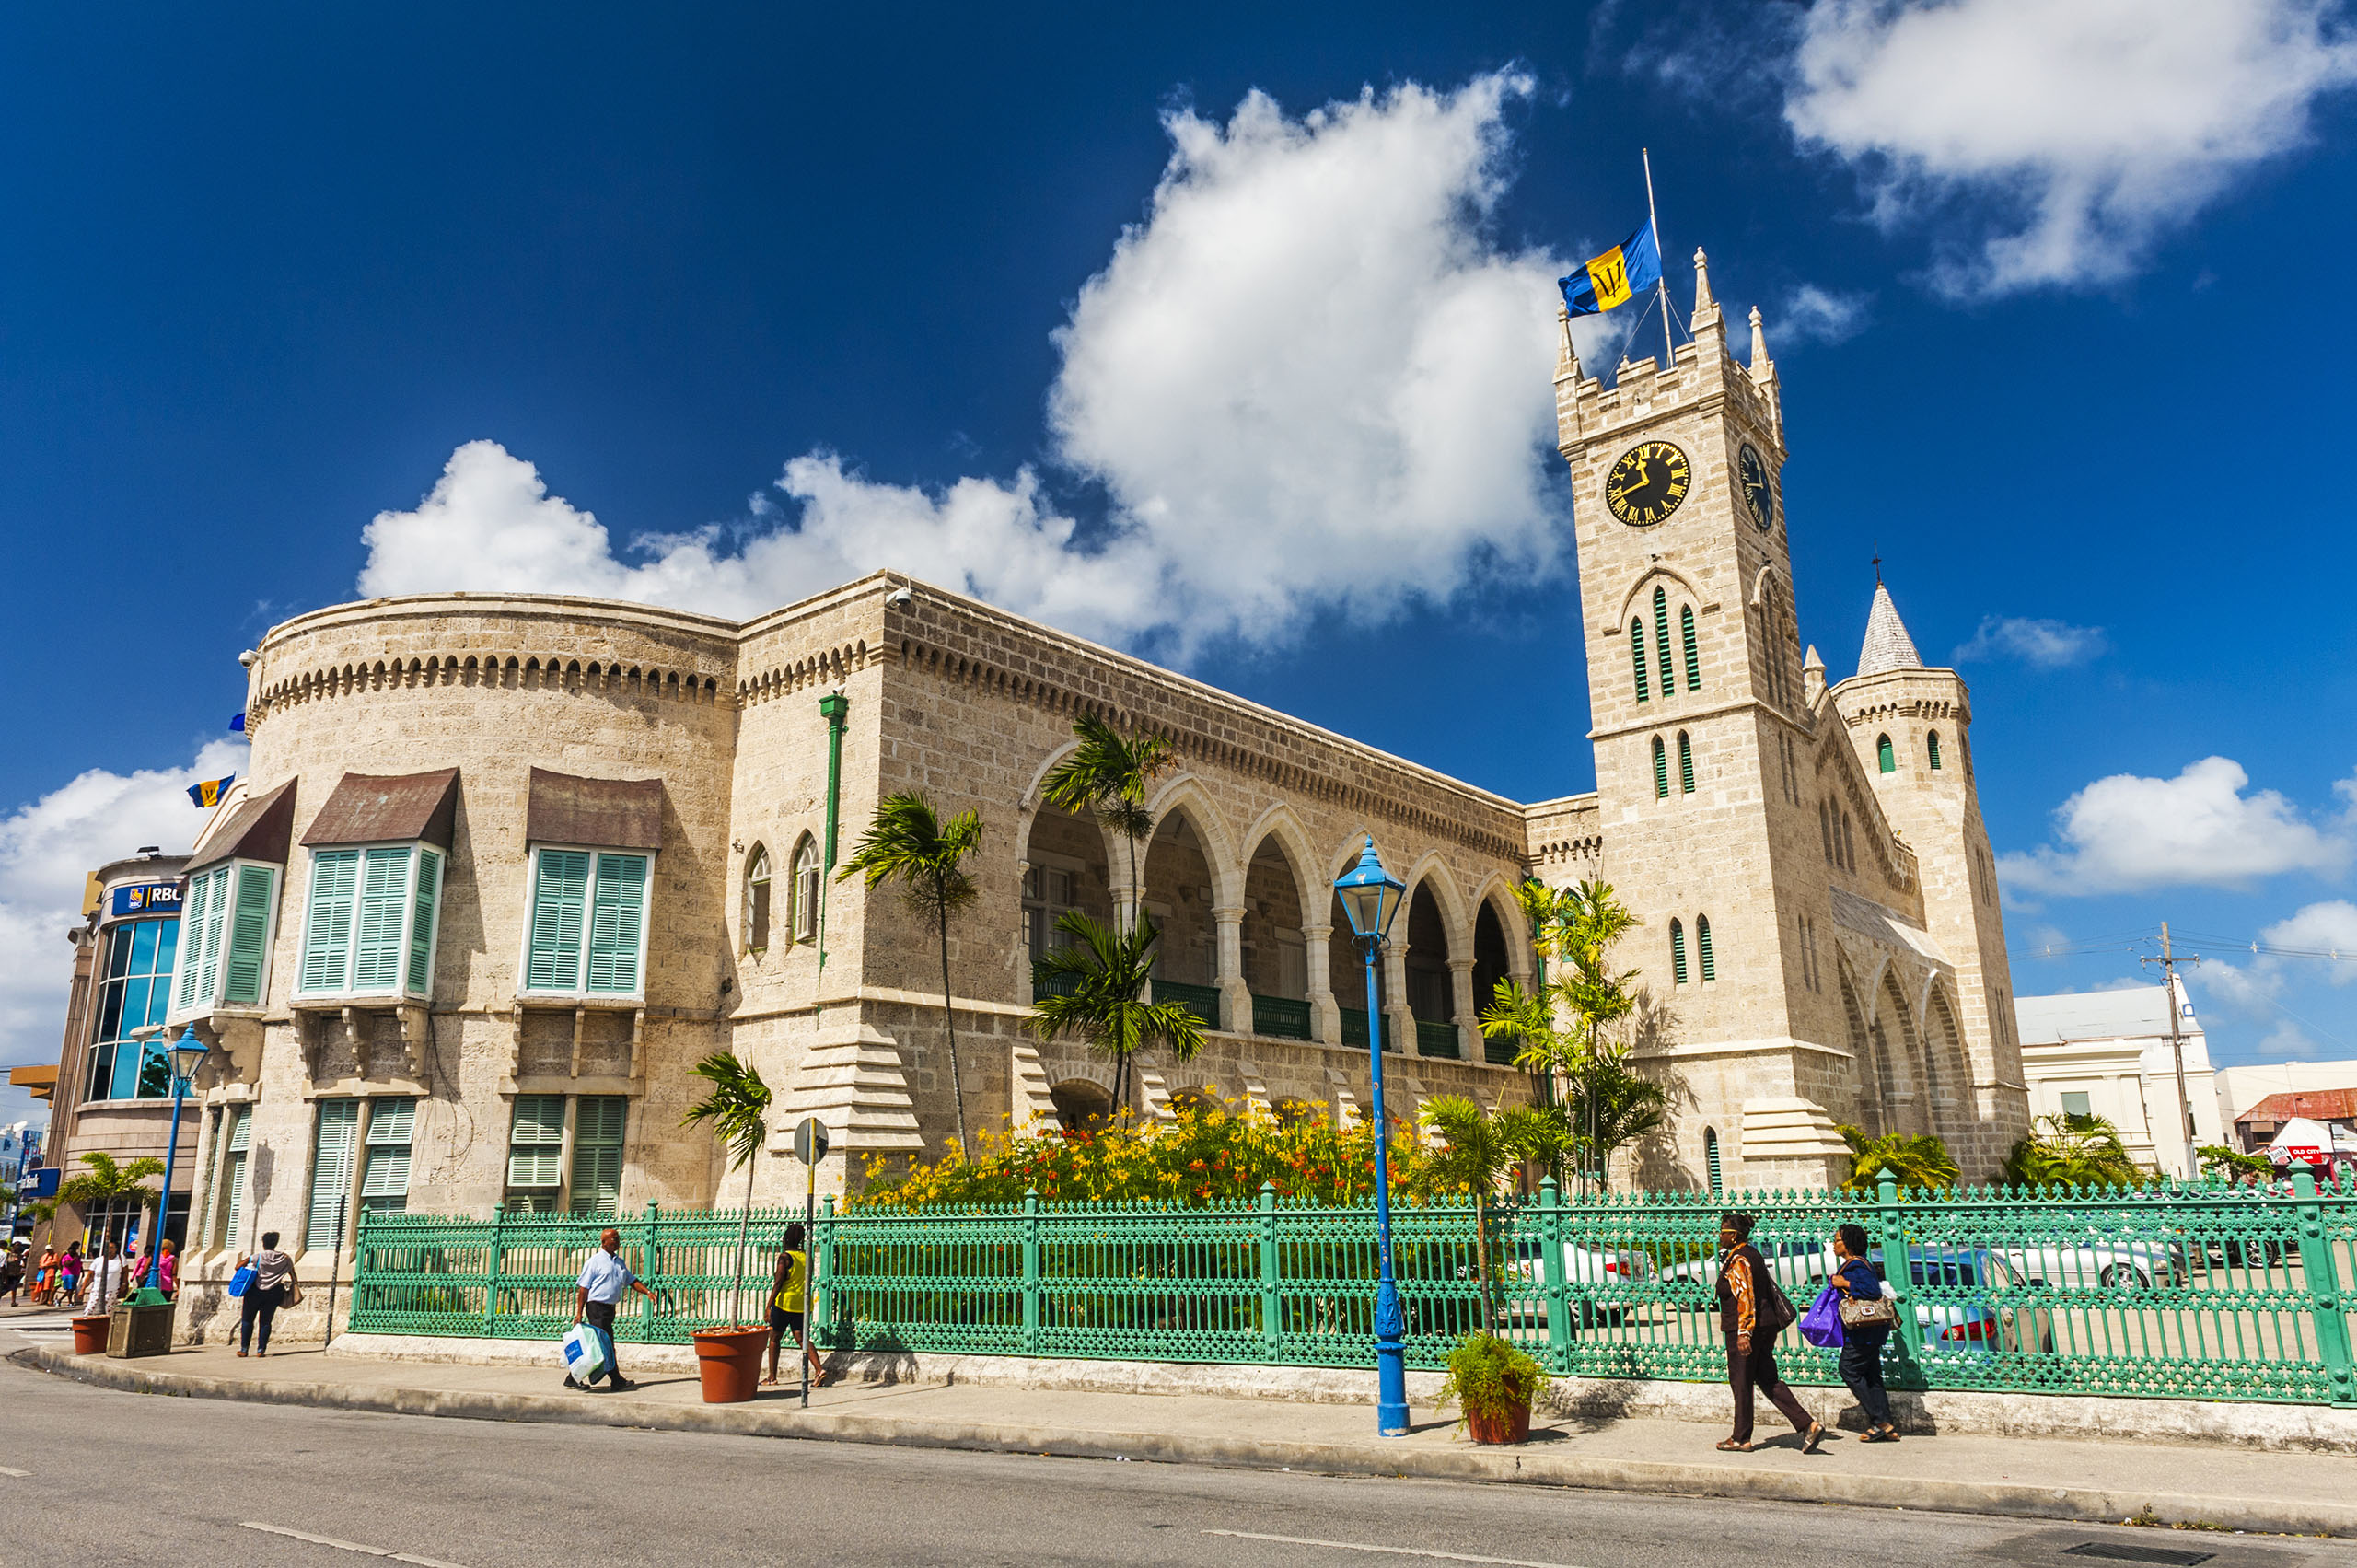 BRIDGETOWN, BARBADOS - DECEMBER 12, 2013: People walking in front of Parliament government building which is located on Broad Street